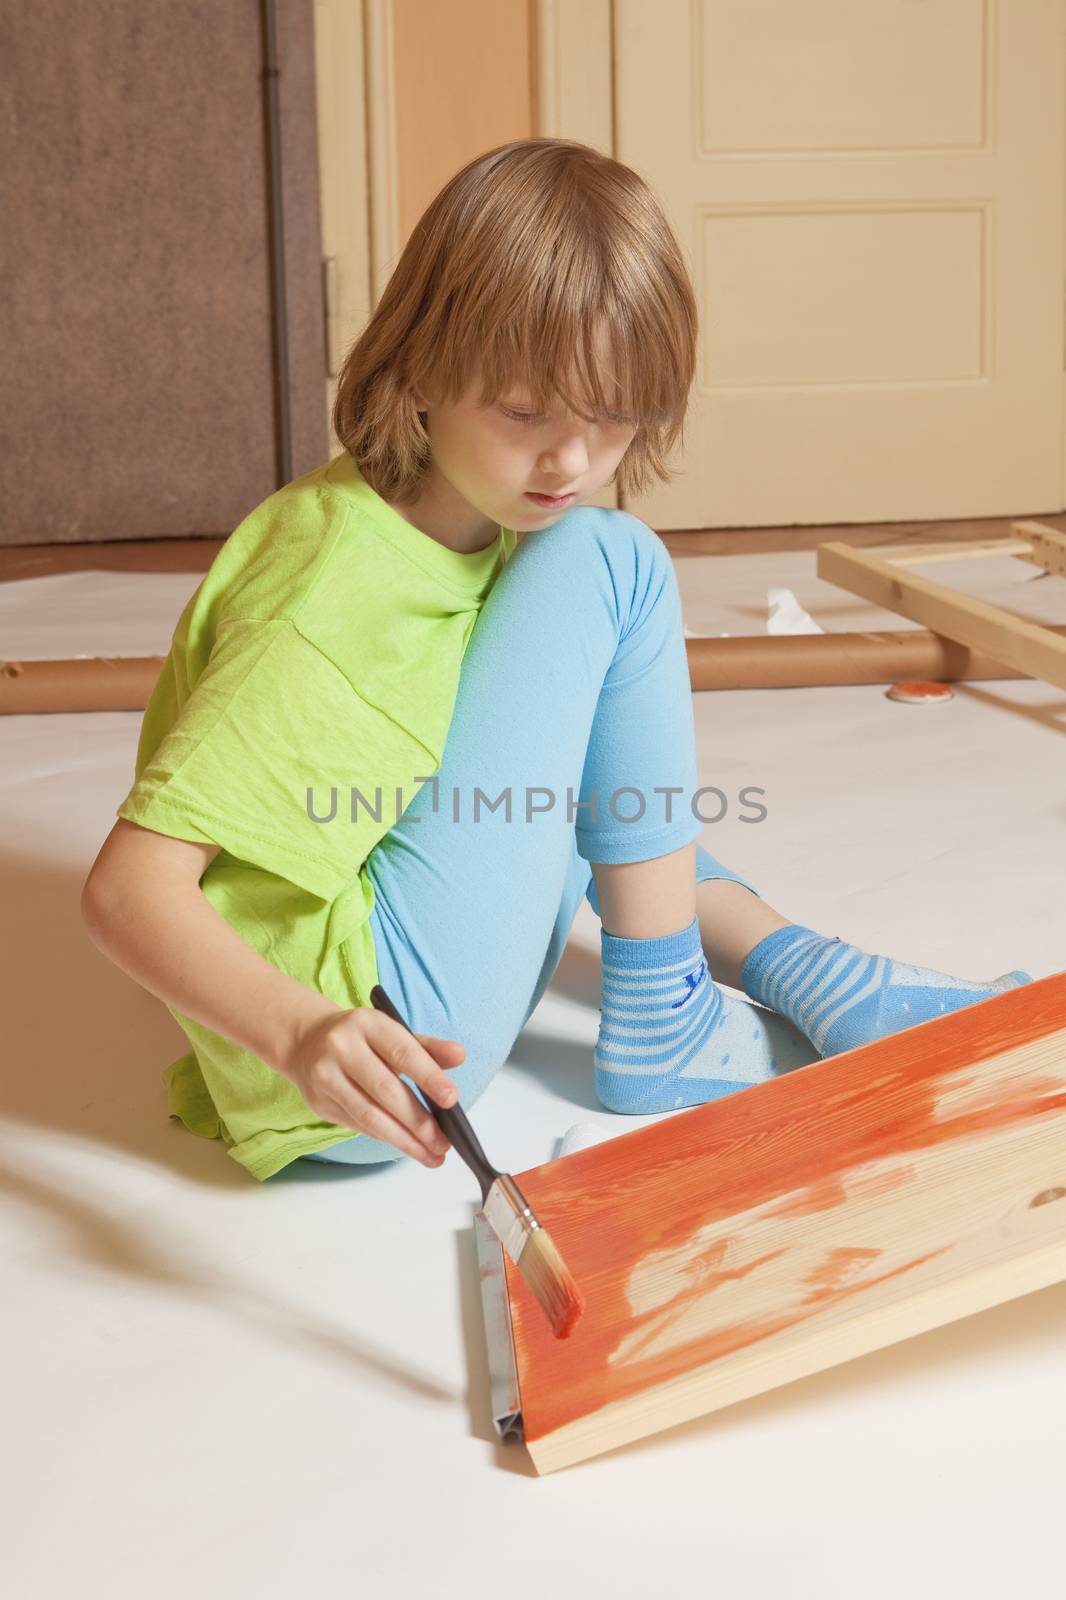 Boy with Blond Hair Painting a Board with Red Color